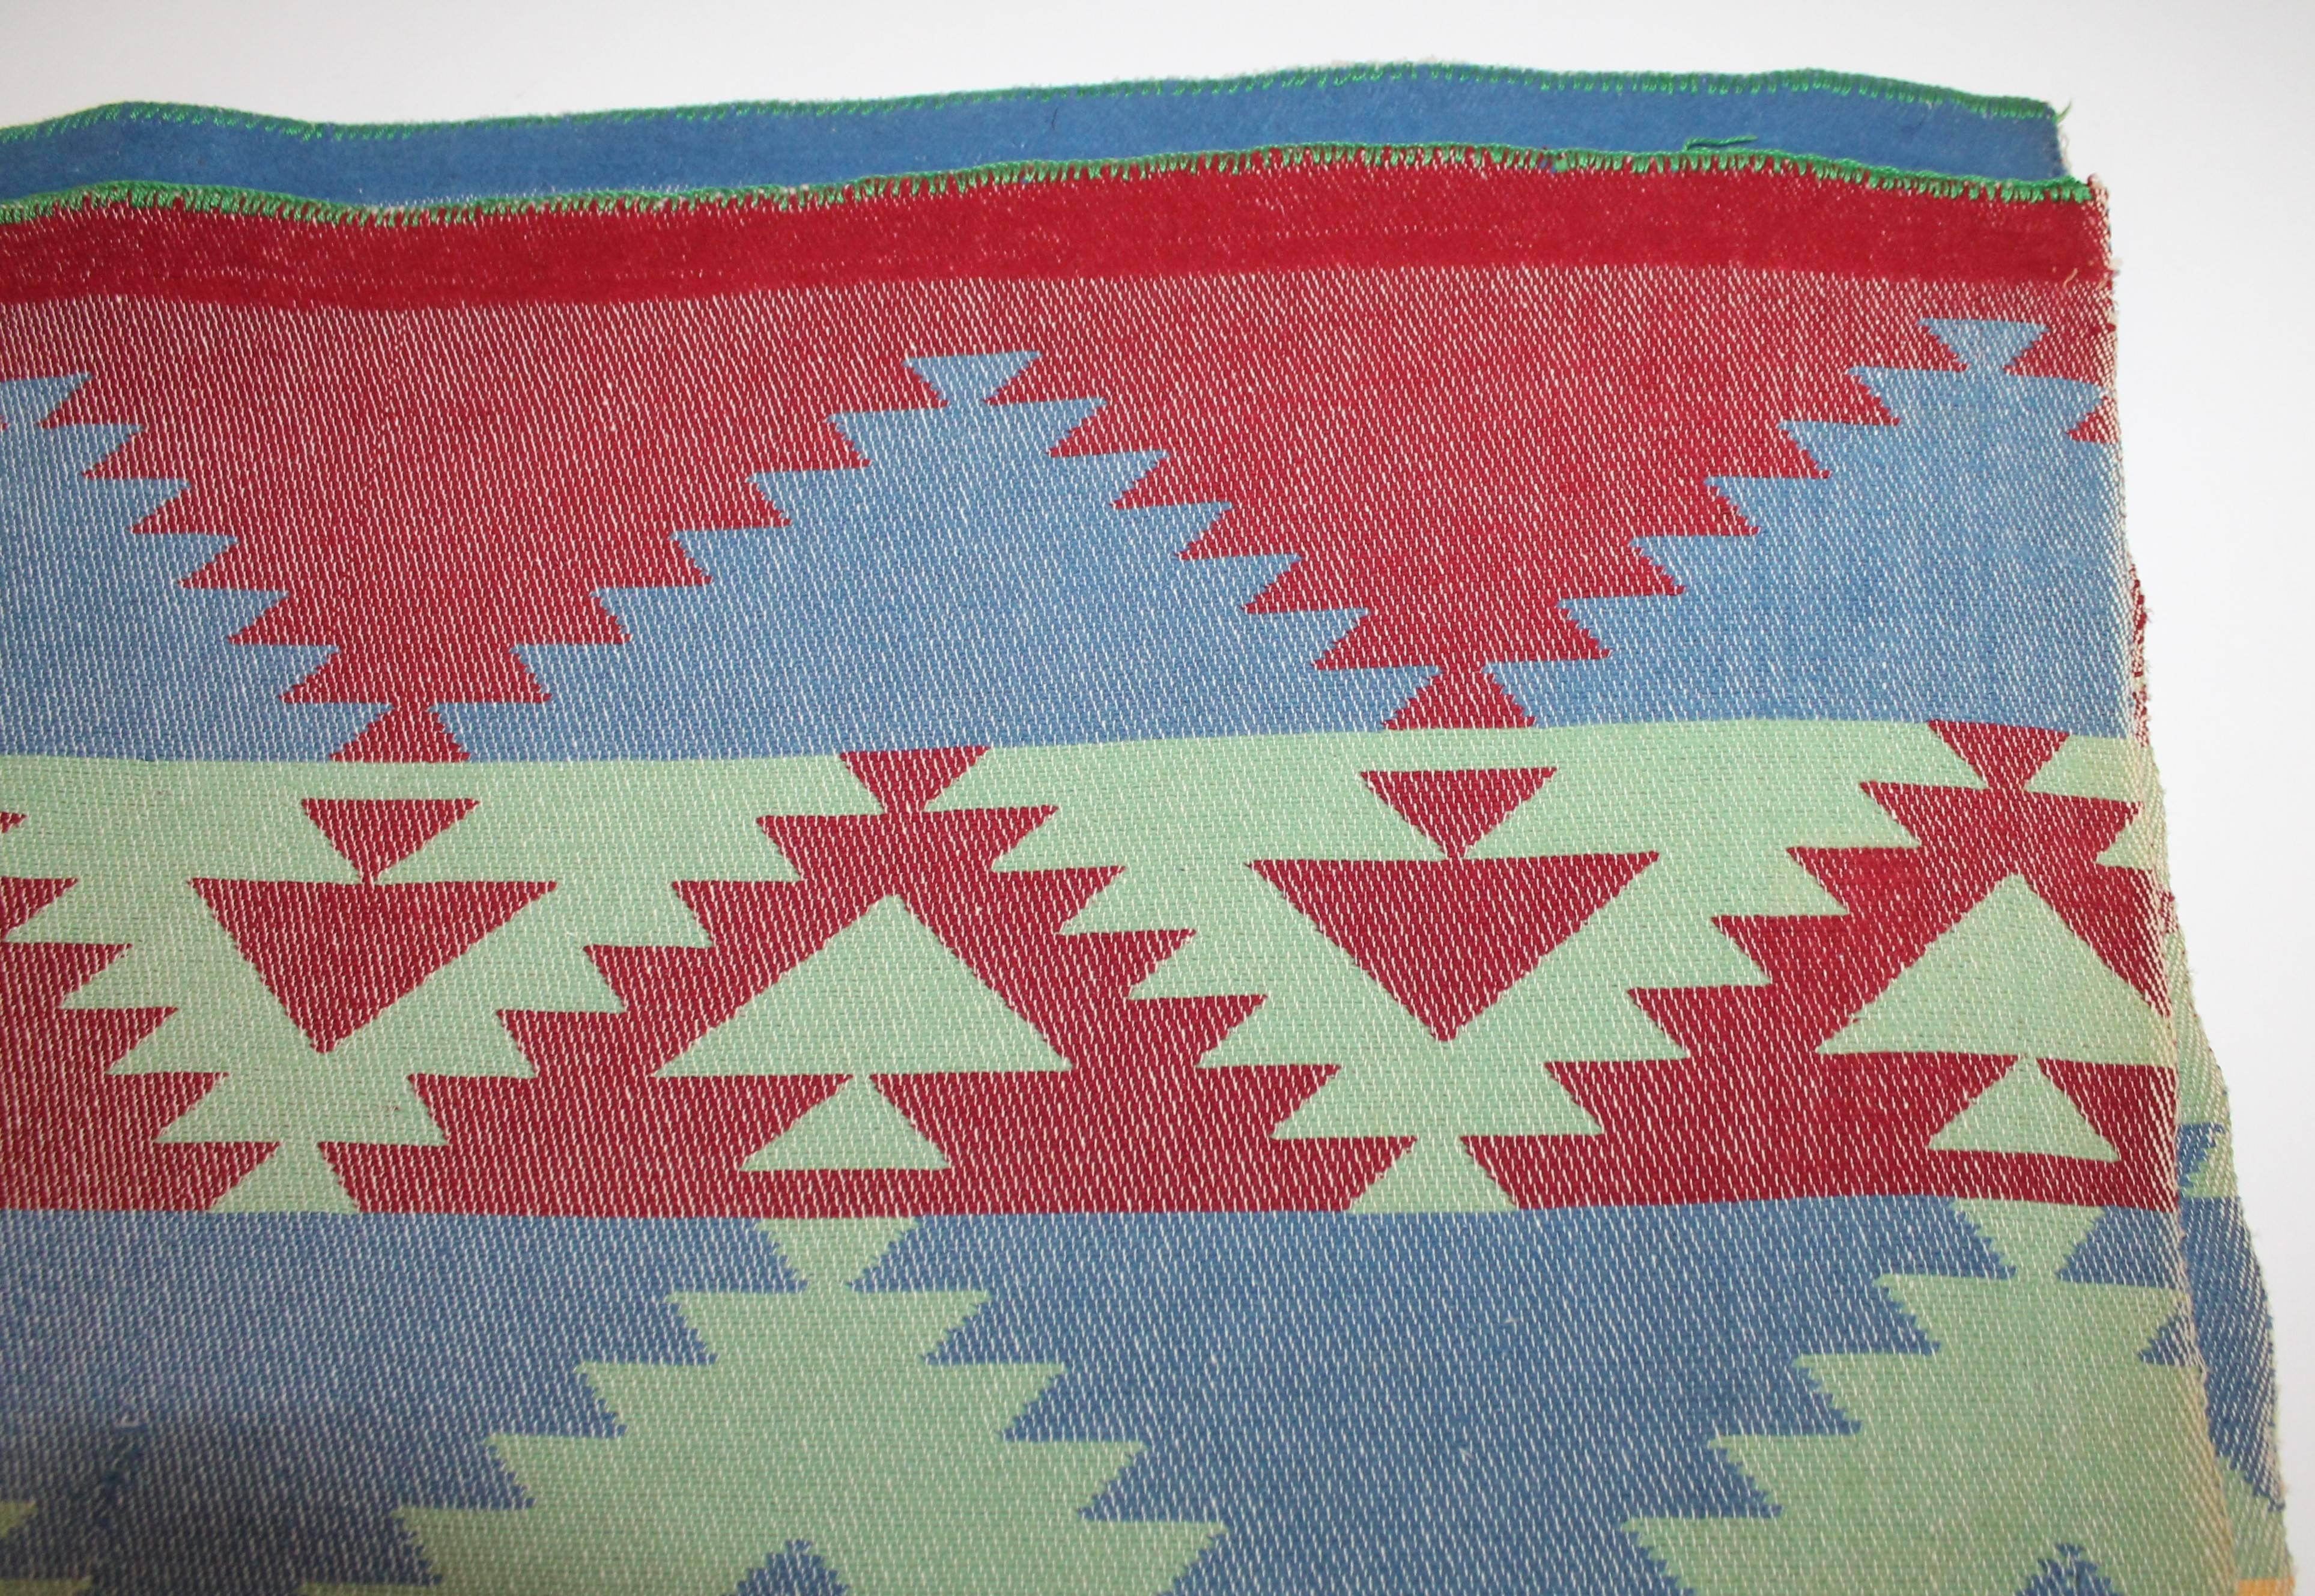 This fine early cotton Indian design camp blanket is in good condition. The most unusual muted colors blanket has a powerful design pattern.